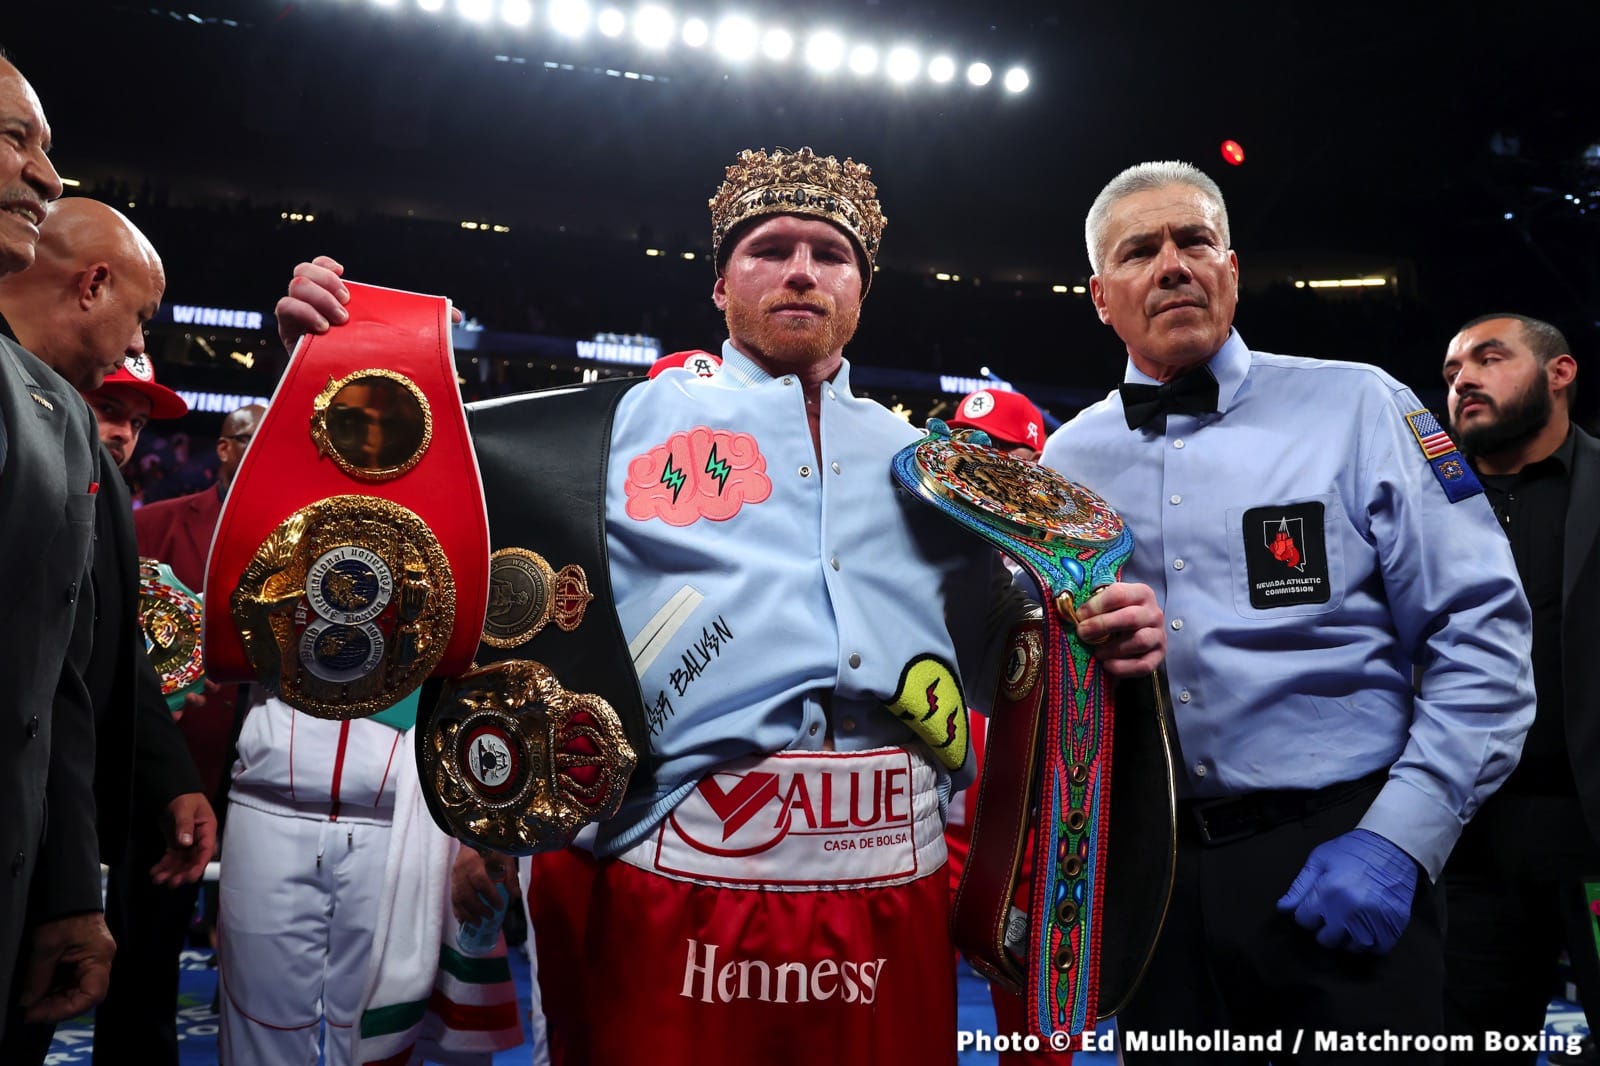 Canelo defeats Golovkin by 12 round decision - Boxing Results